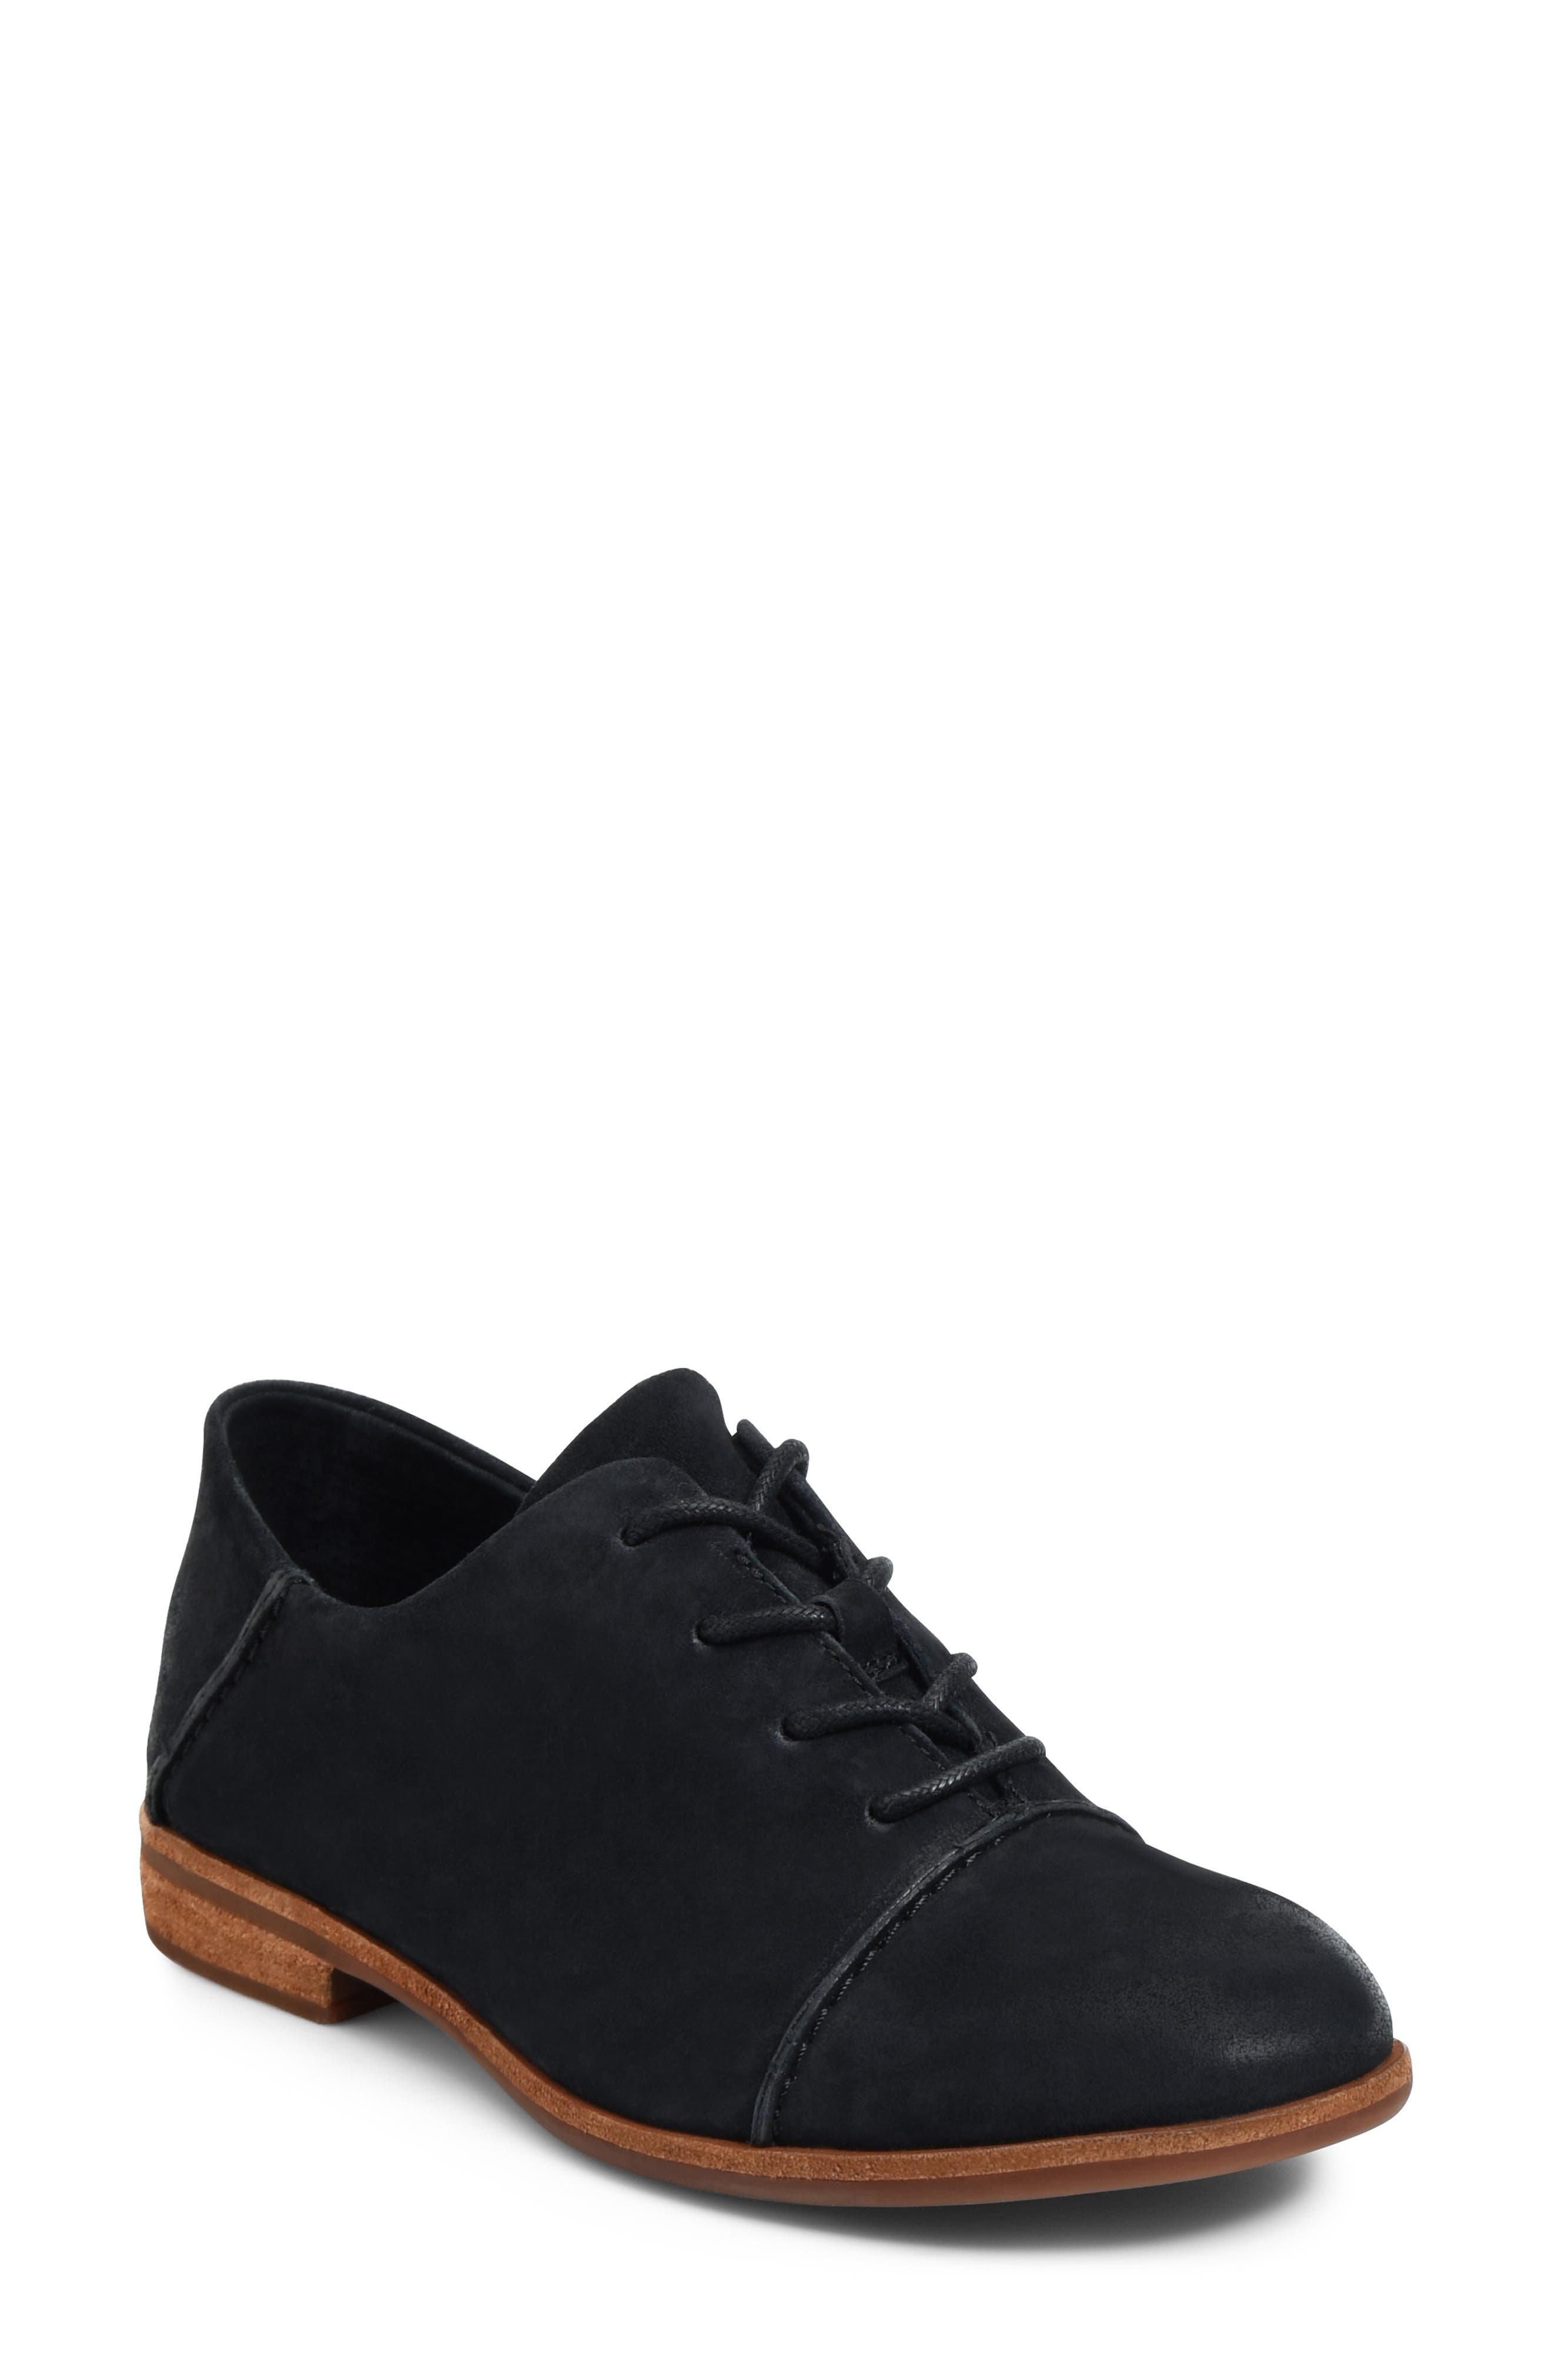 oxford suede shoes womens